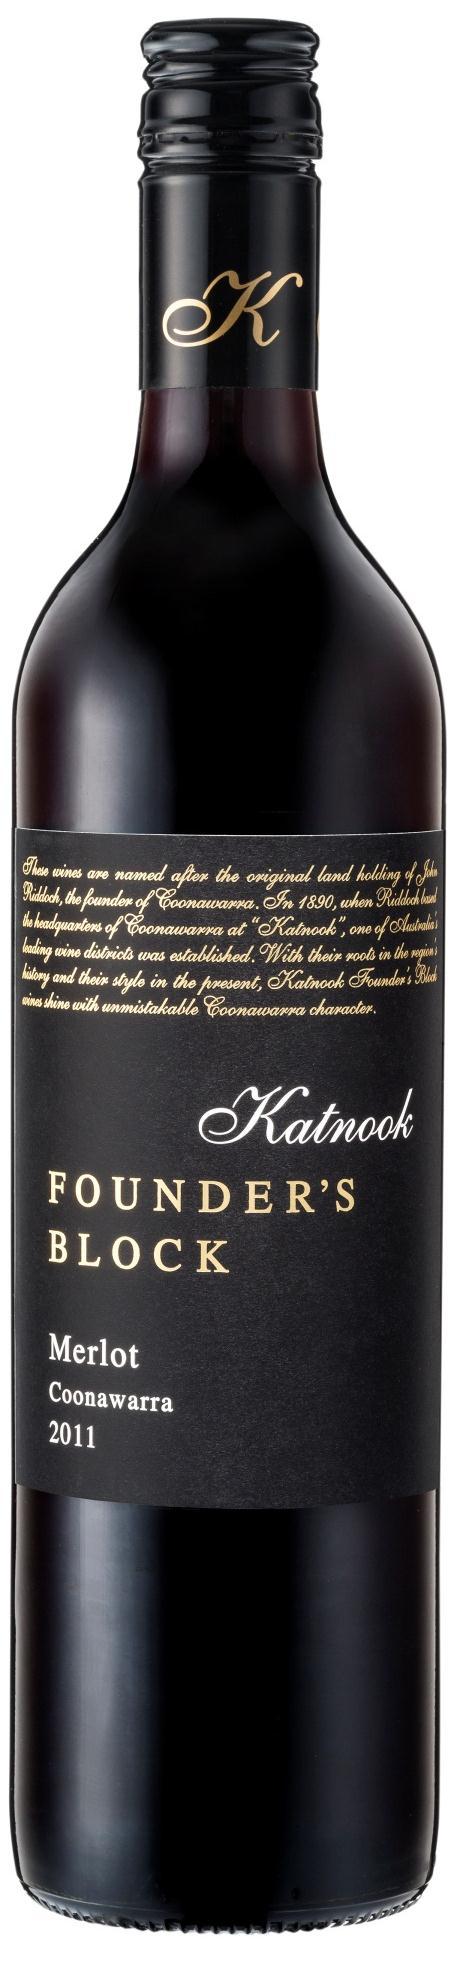 Merlot 2011 With Katnook Estate pedigree, the Founder s Block range is styled for everyday drinking, inviting a modern generation of wine consumers to enjoy the pleasures of Coonawarra wine.